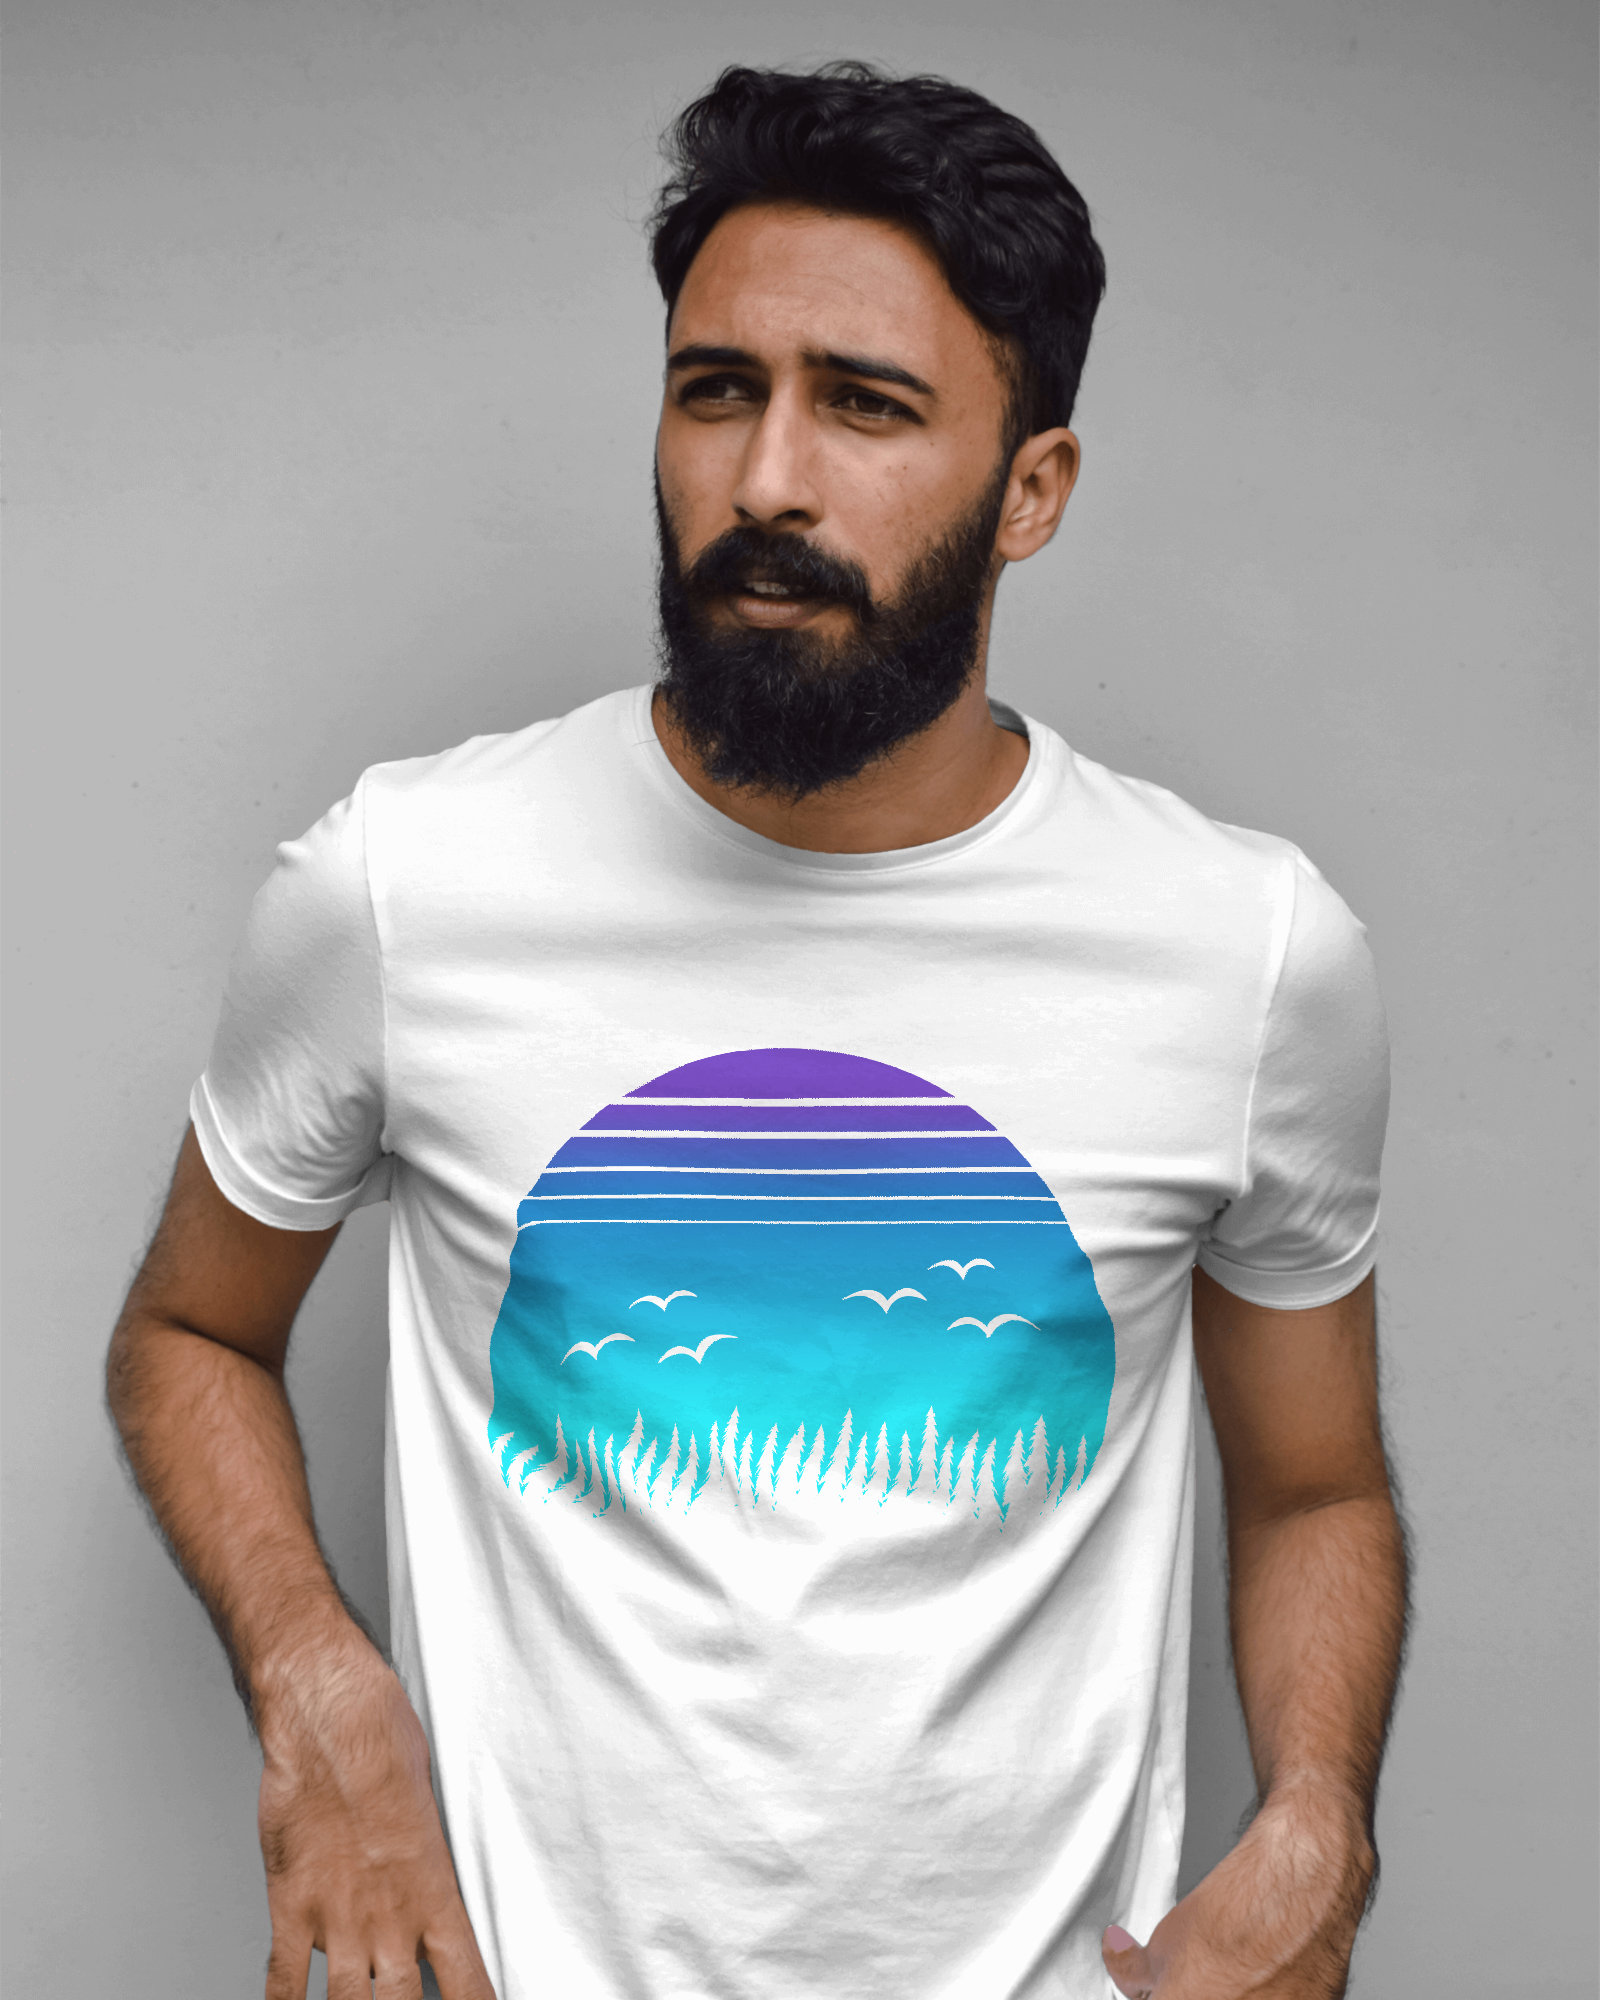 Forest And Birds Retro Vintage Design T-Shirt For Man Printrove